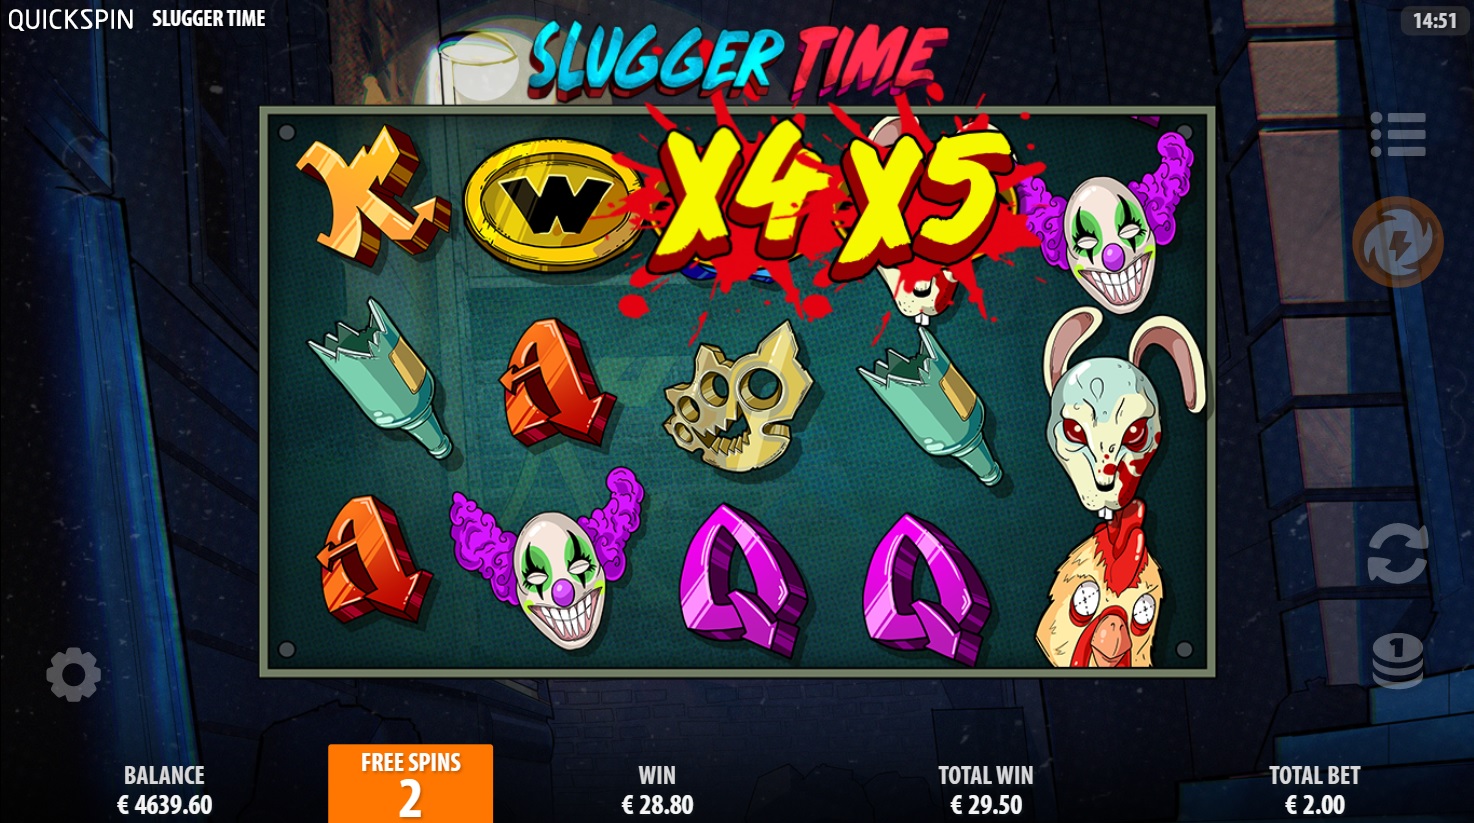 Slugger Time, Free spins feature